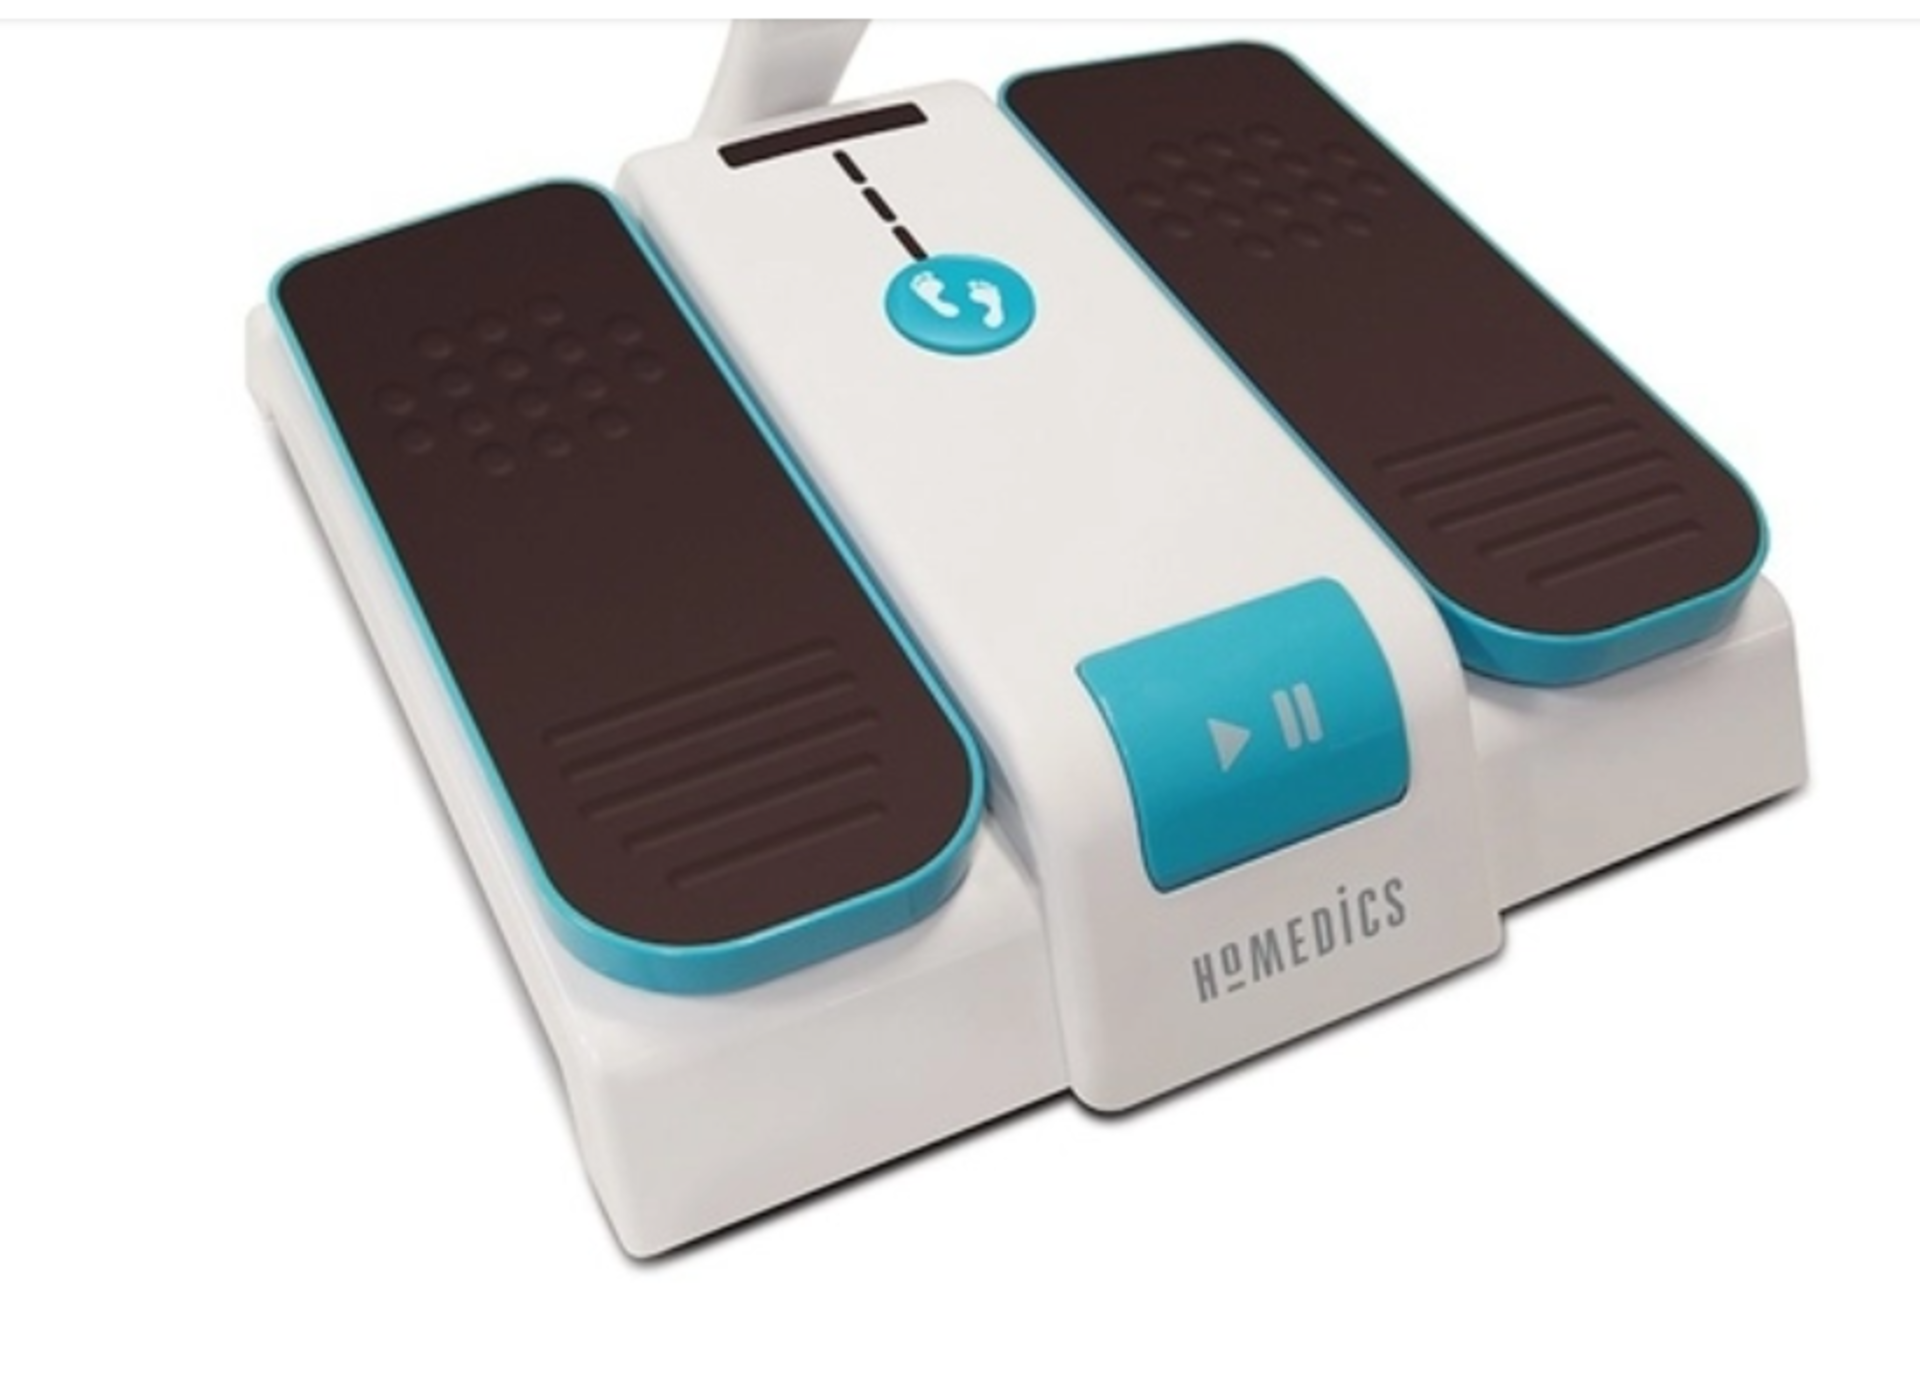 3 X BRAND NEW HOMEDICS LEG EXERCISERS TO HELP IMPROVE CIRCULATION IN LEGS AND FEET RRP £69 EACH R15